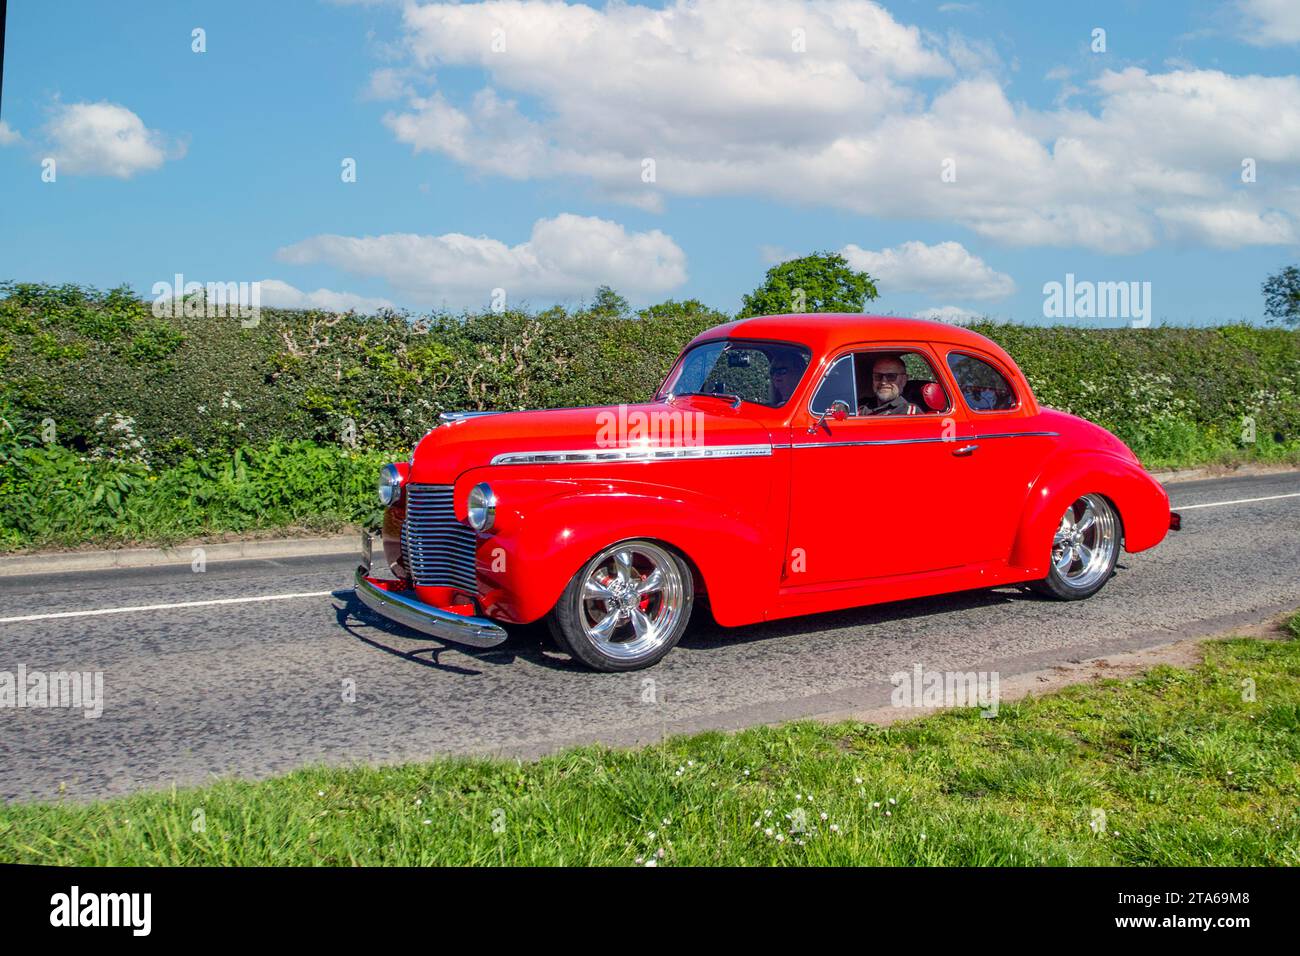 1940 40s forties Red American Chevrolet GMC.  Large USA 5700 cc petrol-powered yesteryear saloon car; Vintage, restored classic motors, automobile collectors motoring enthusiasts, historic veteran cars travelling in Cheshire, UK Stock Photo